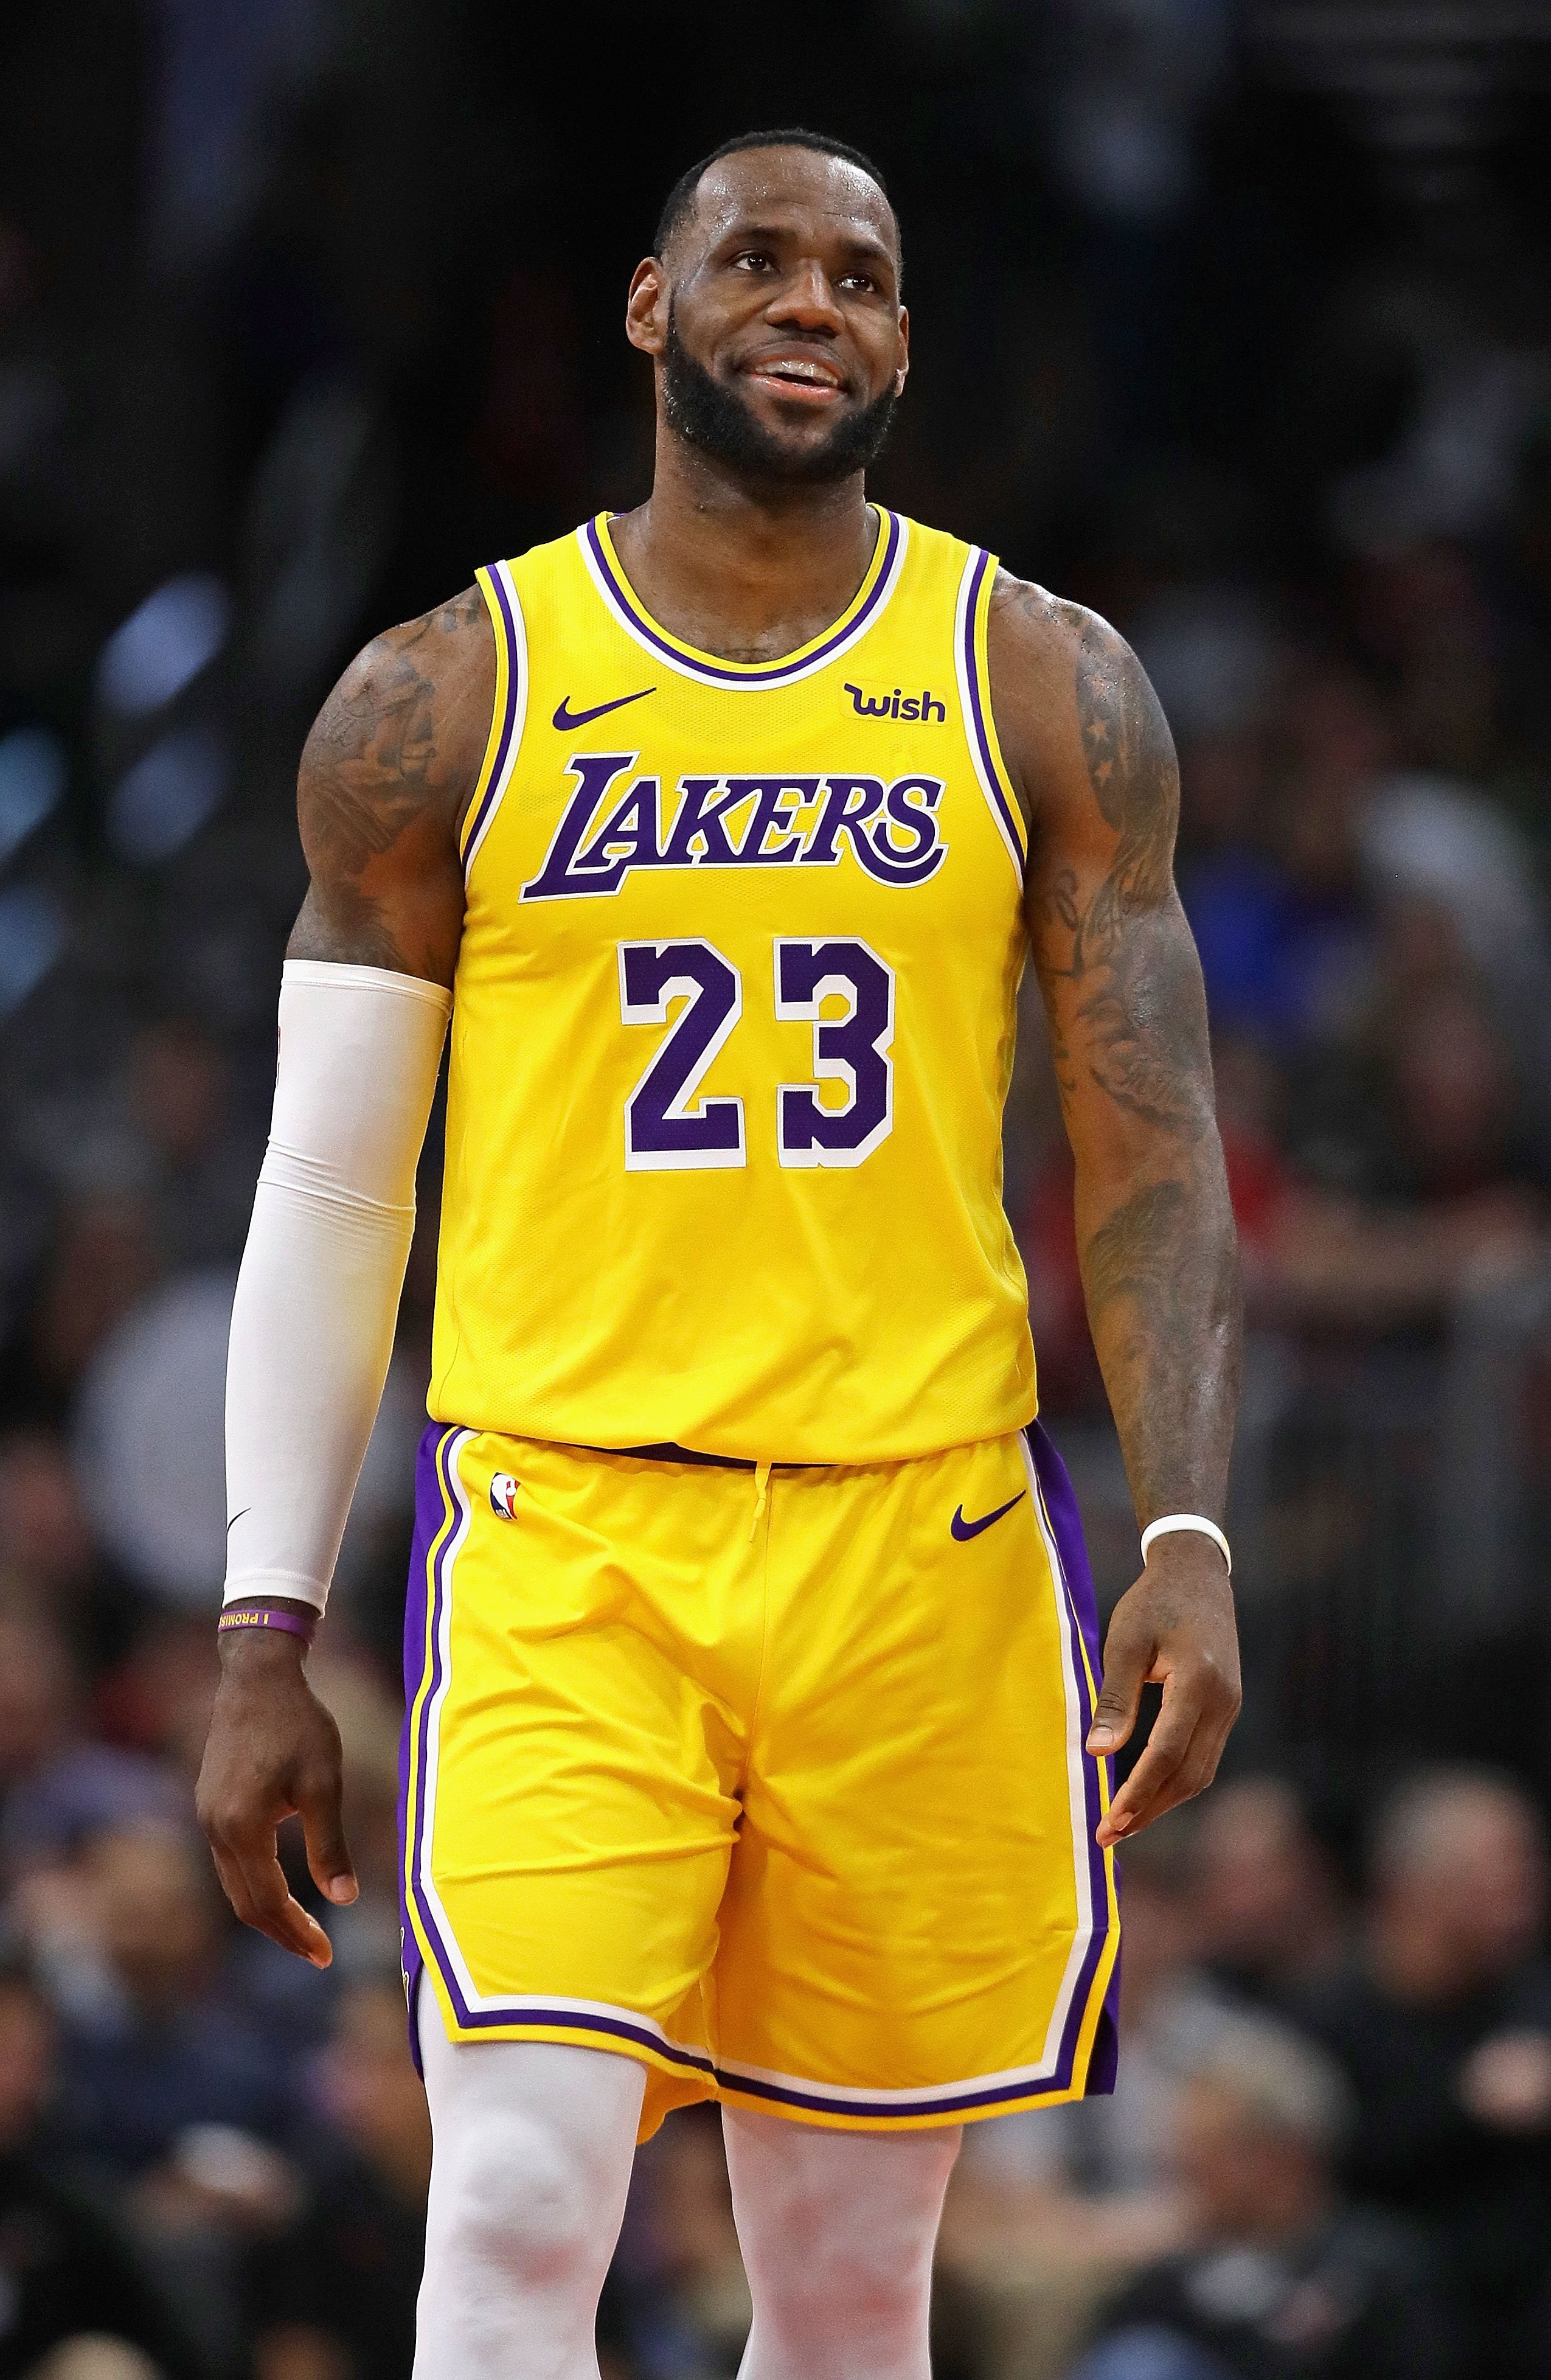 LeBron James #23 of the Los Angeles Lakers smiles after a play against the Chicago Bulls on March 12, 2019 | Photo: Getty Images